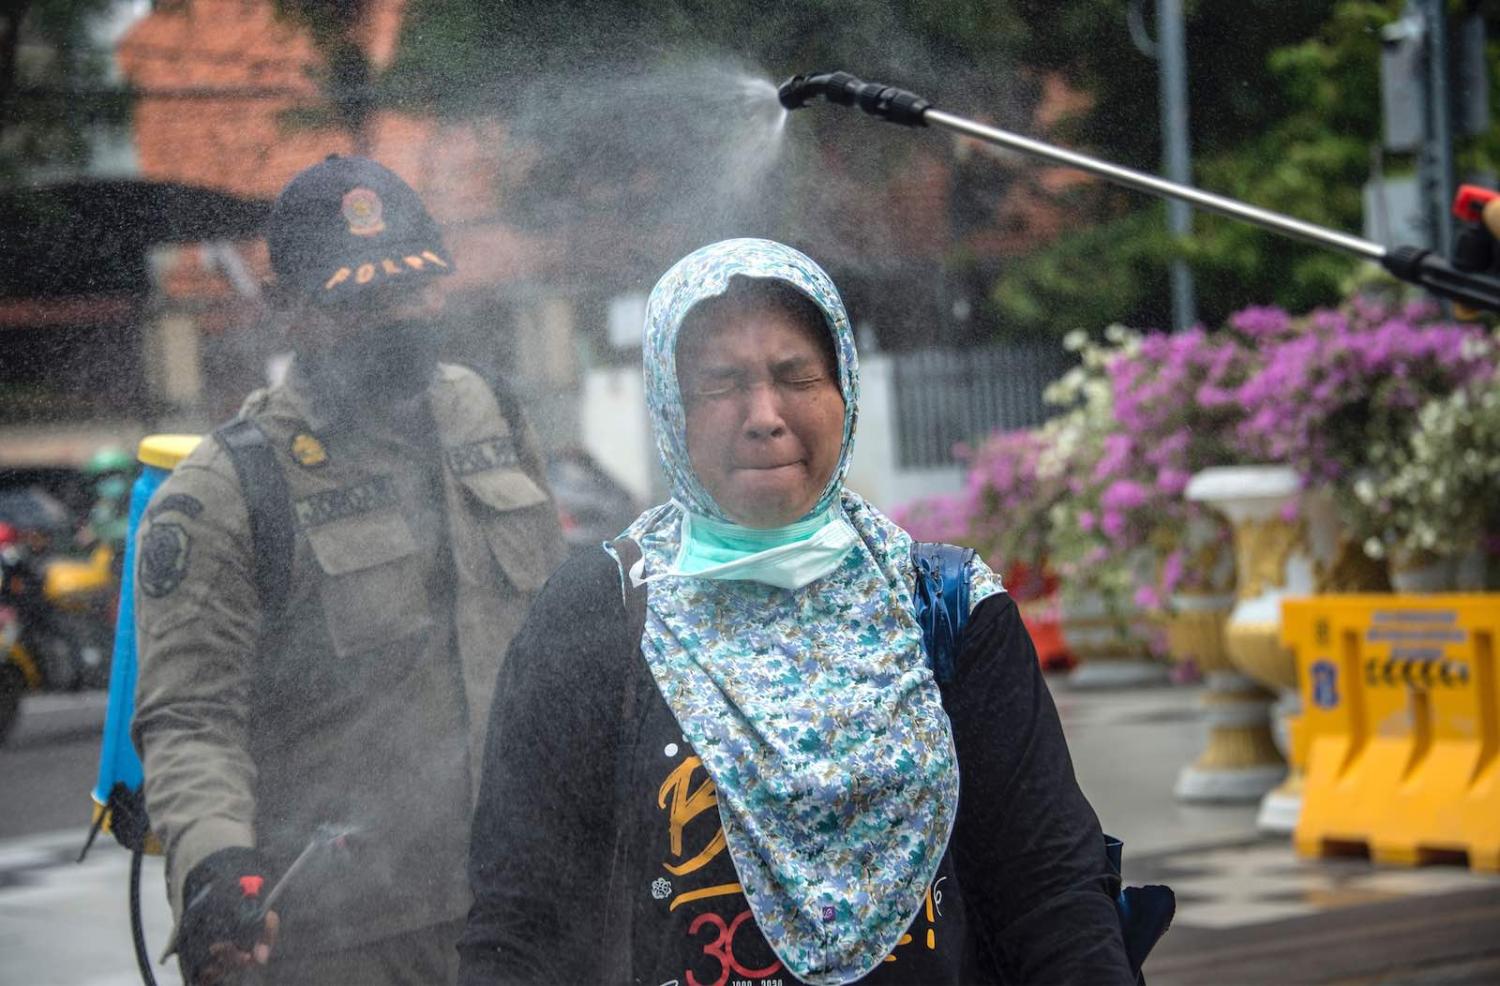 A woman is sprayed with disinfectant on Monday before entering a local government office as a precautionary move against the spread of the Covid-19 coronavirus in Surabaya, Indonesia (Juni Kriswanto/AFP/Getty Images)